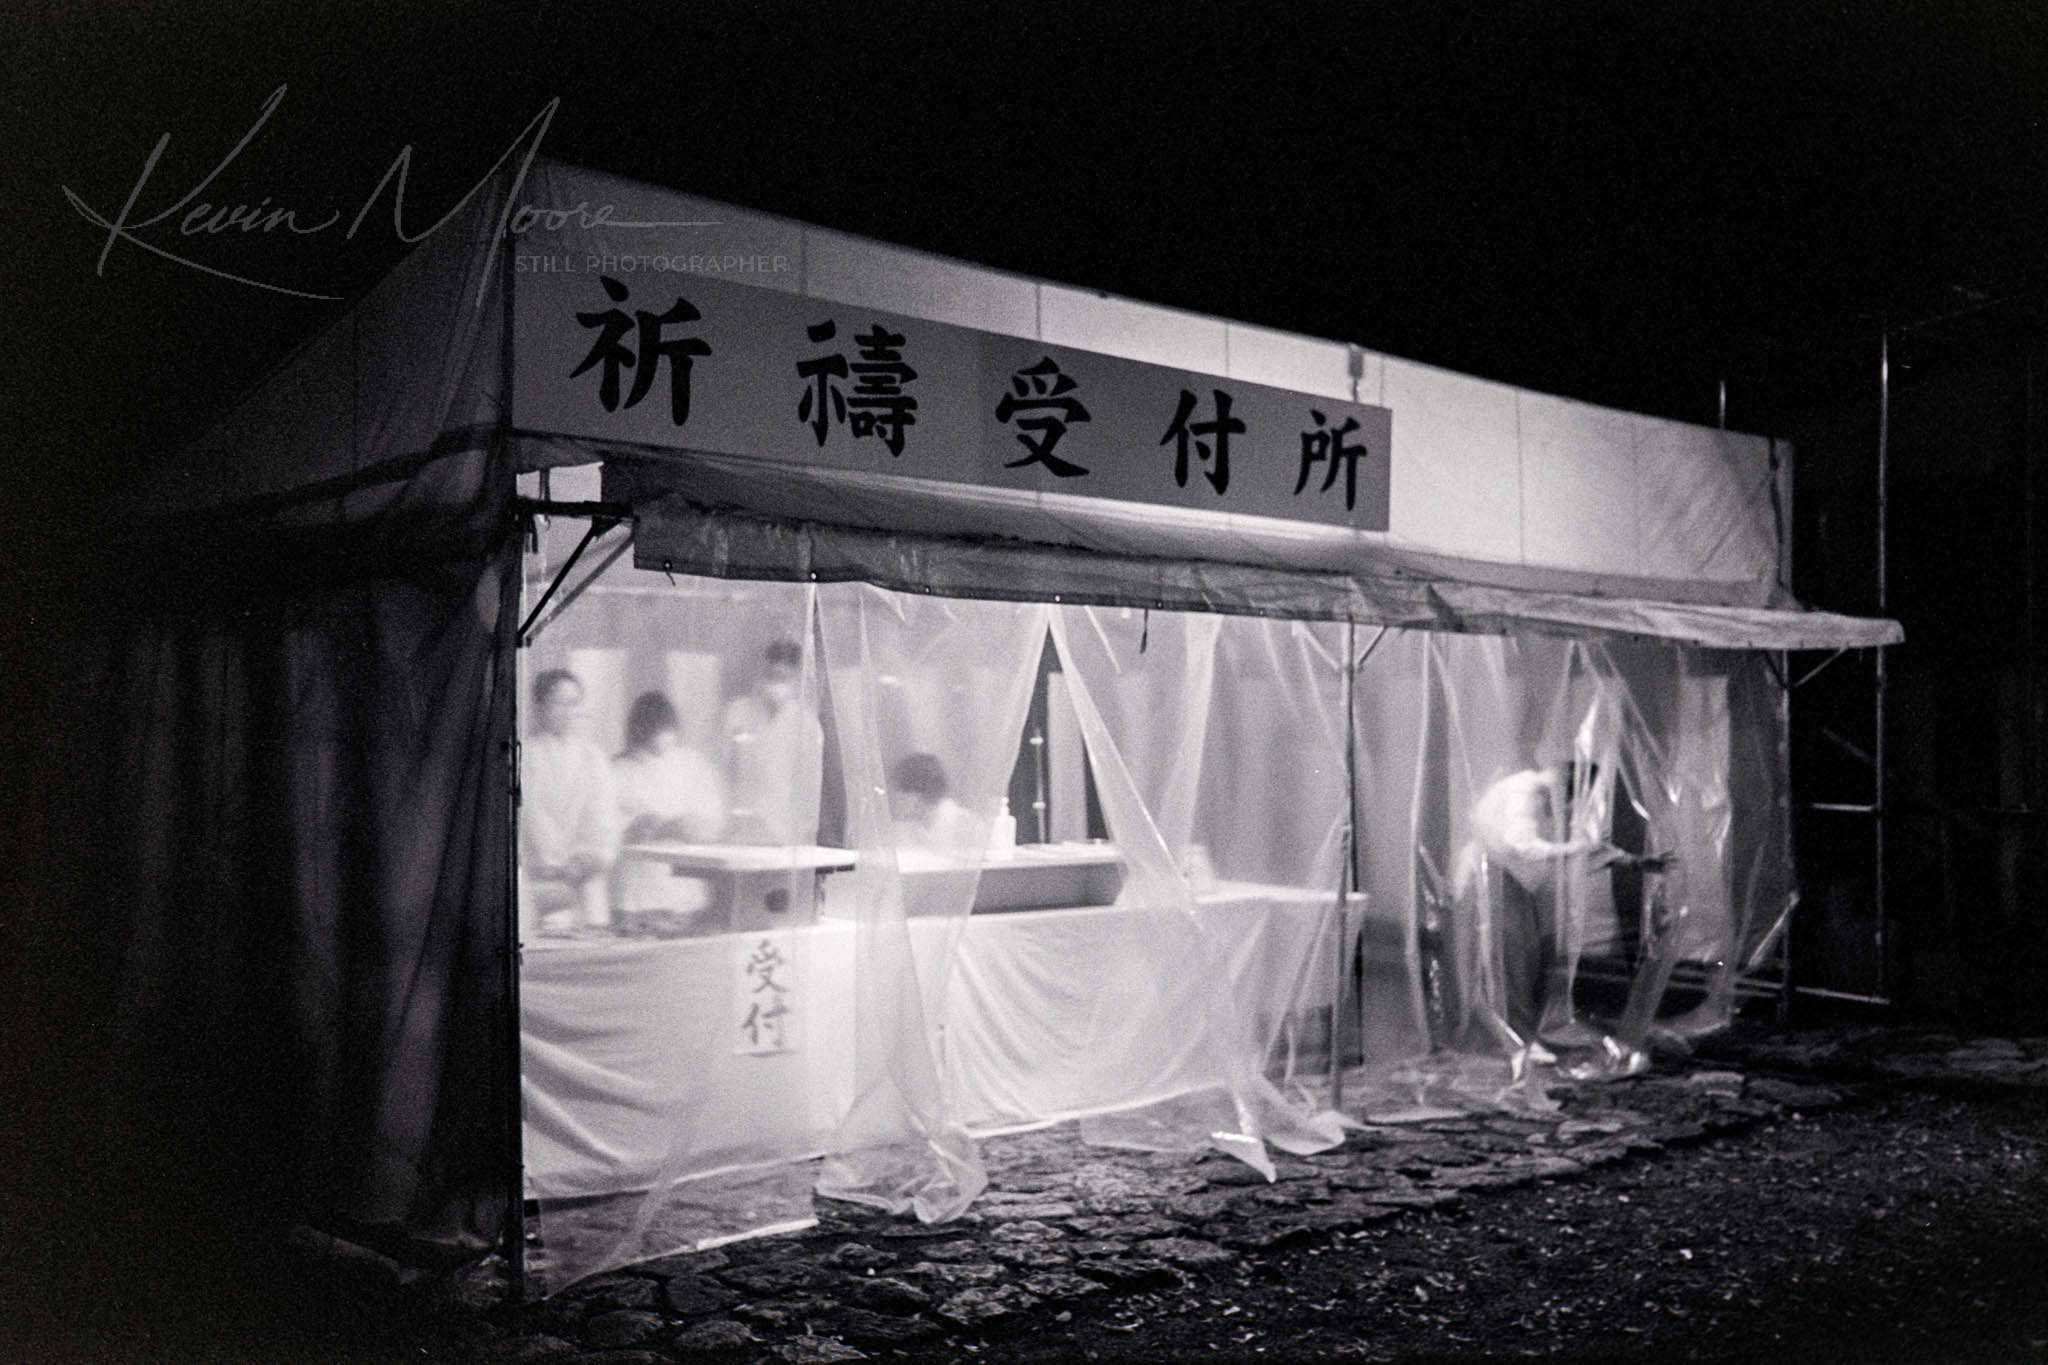 Illuminated Night Temple Tent: New Years Eve During Pandemic Japan, silhouettes visible through semi-transparent walls.